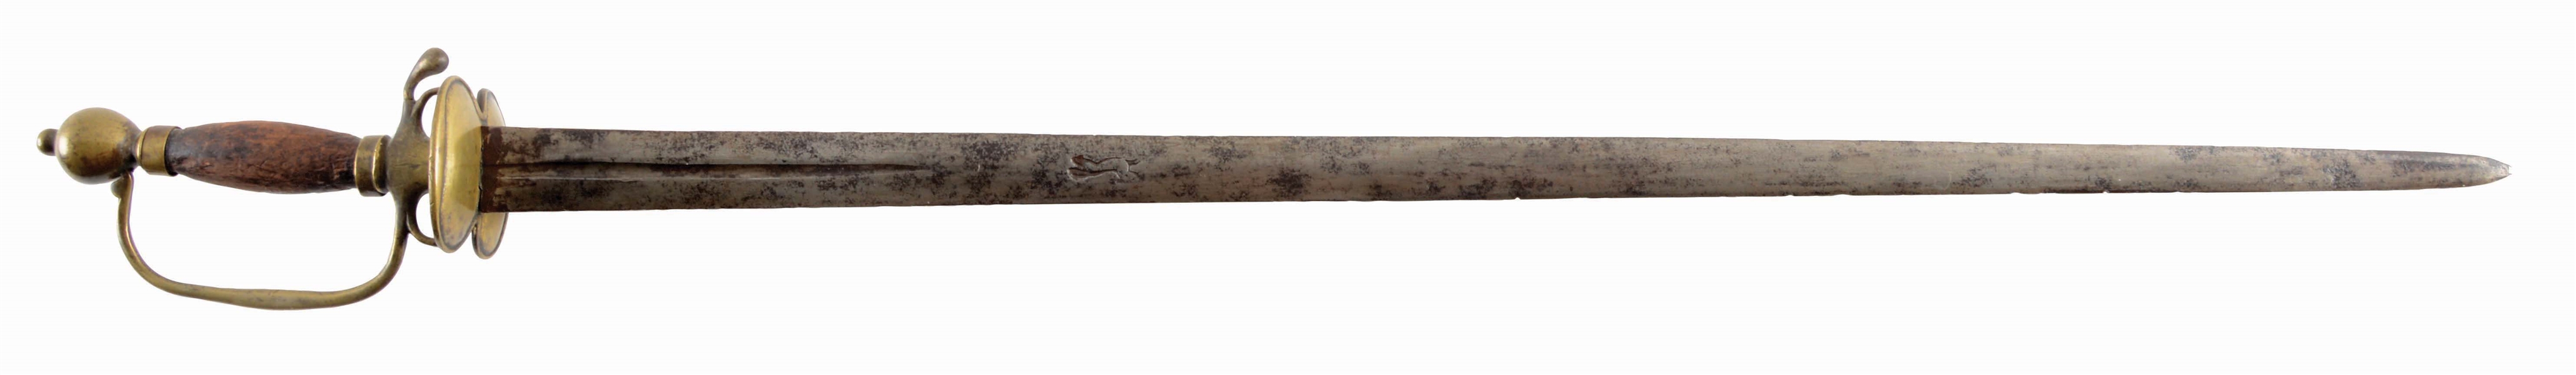 REVOLUTIONARY WAR OFFICERS SMALL SWORD WITH MARKED BLADE.